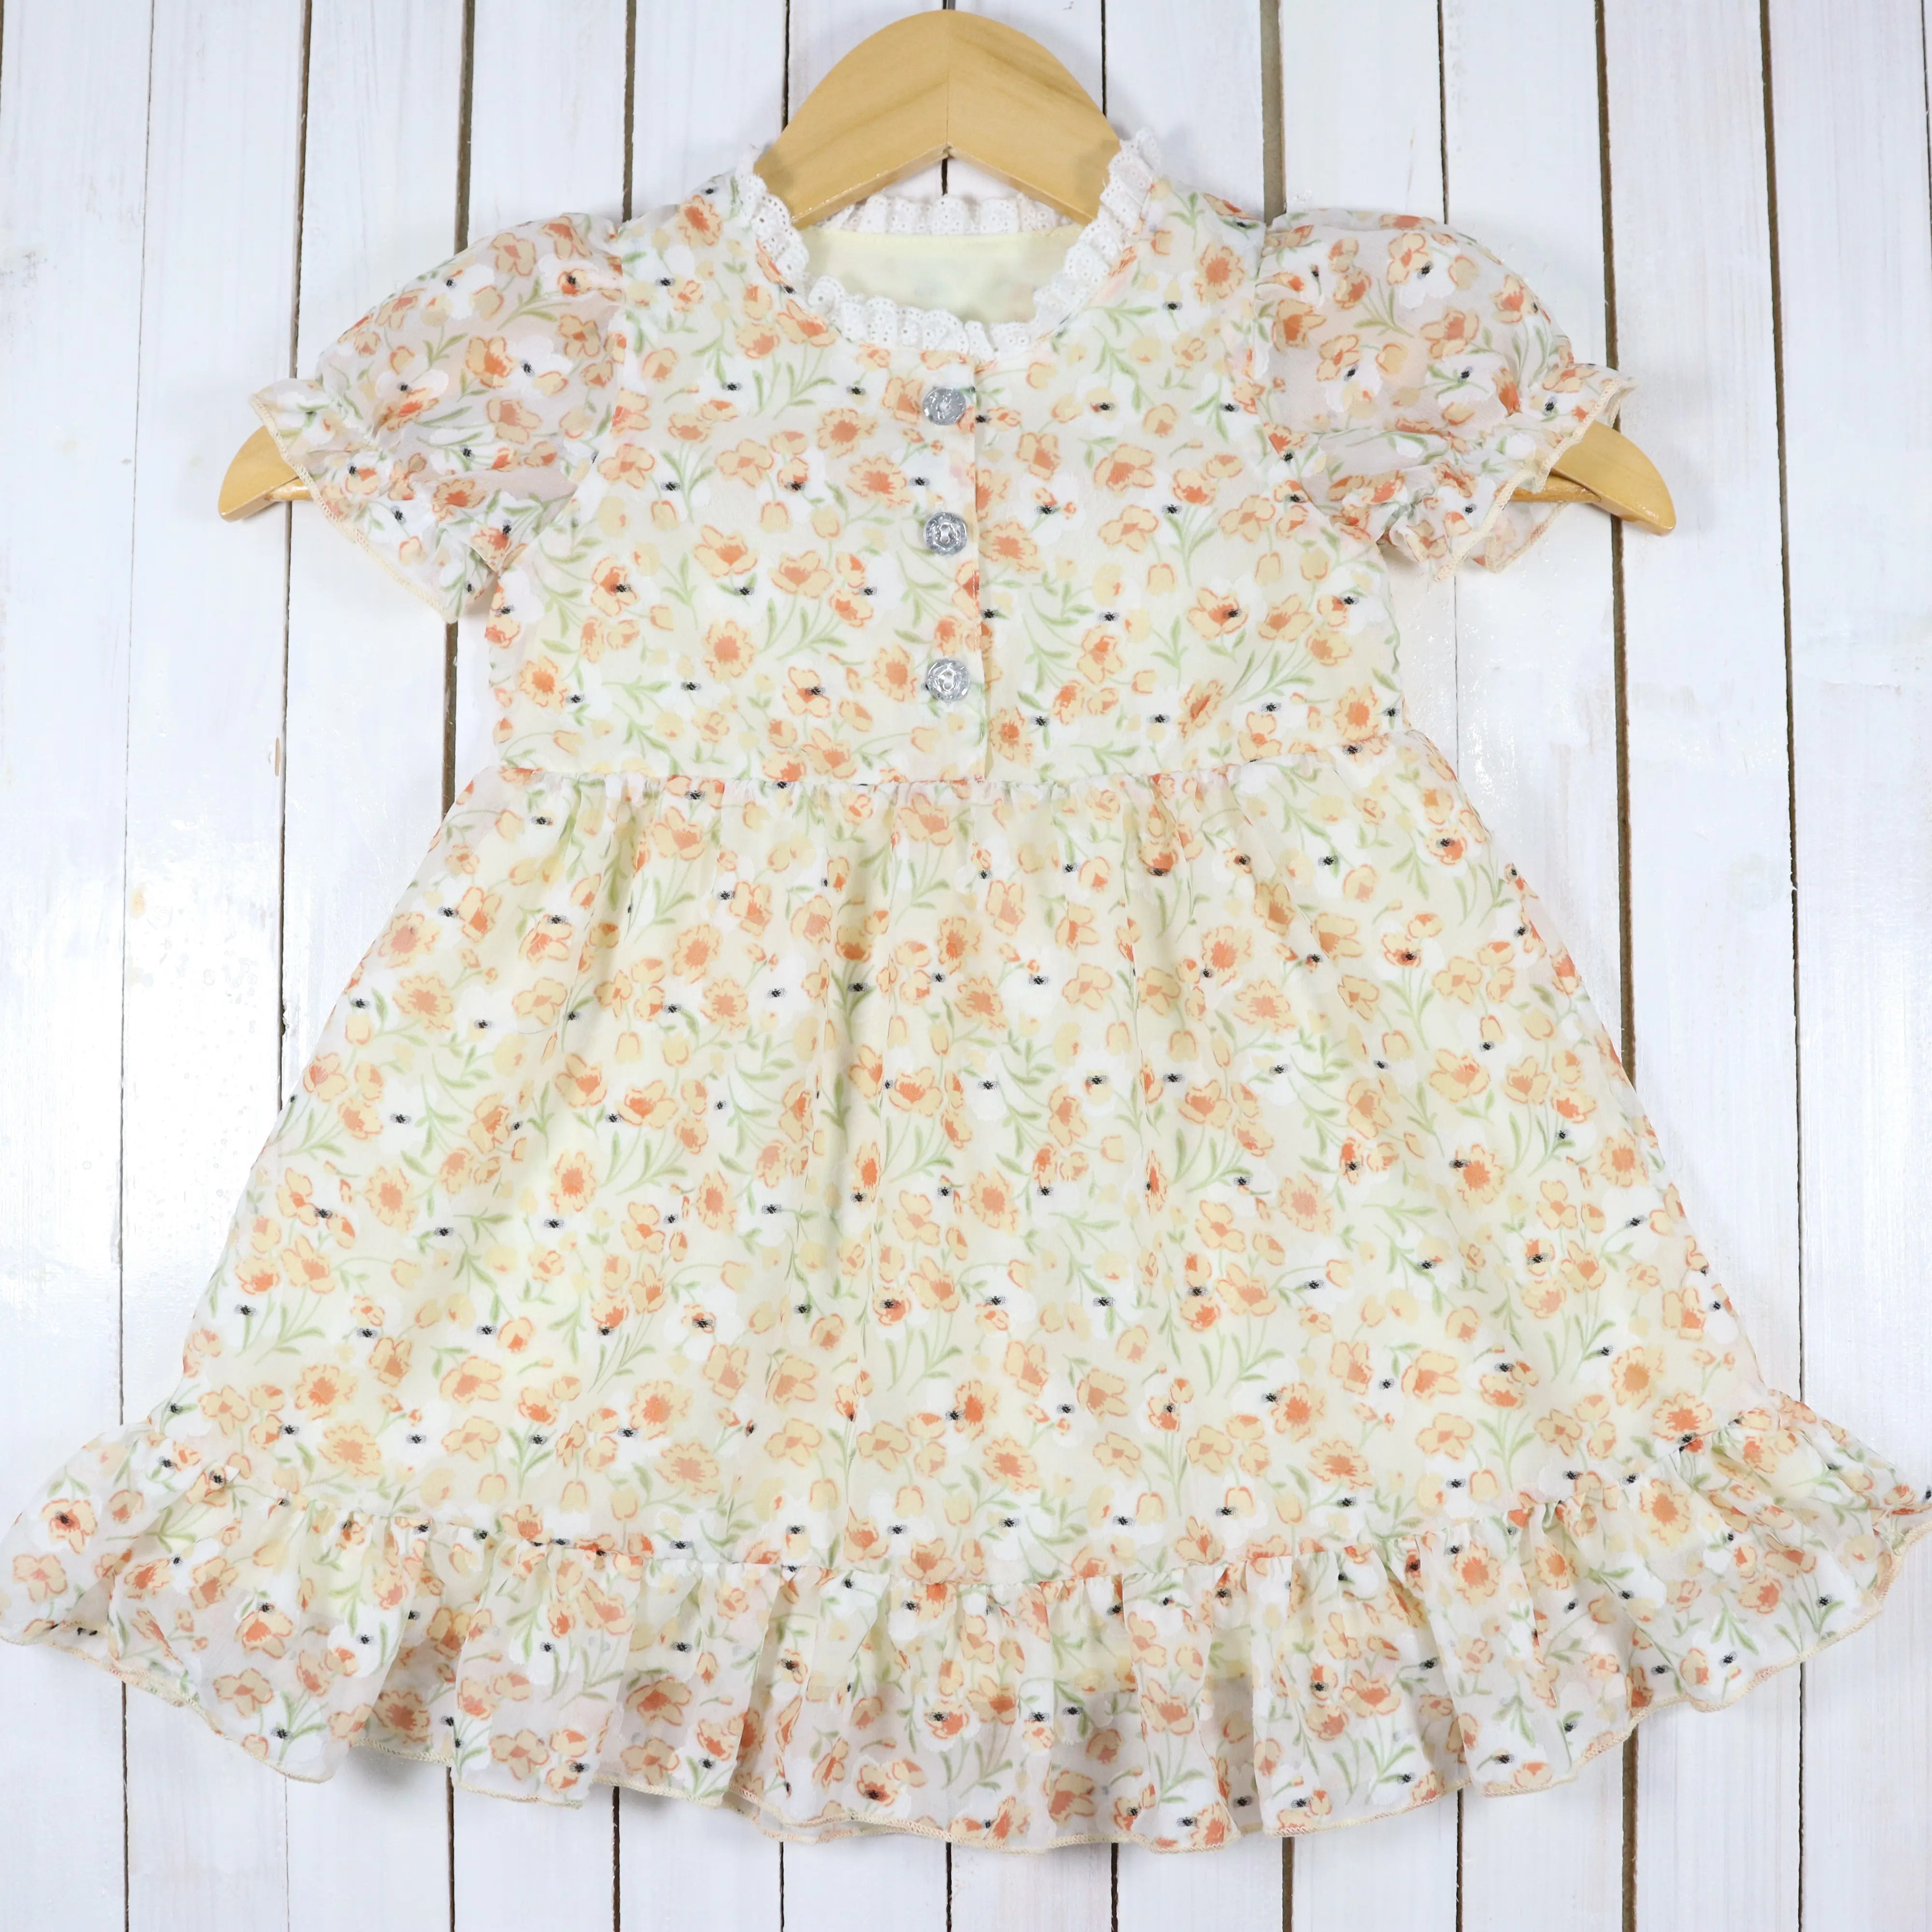 2022 new updated kids children wear dresses summer baby frock design fashionable clothes little girls casual dress clothing